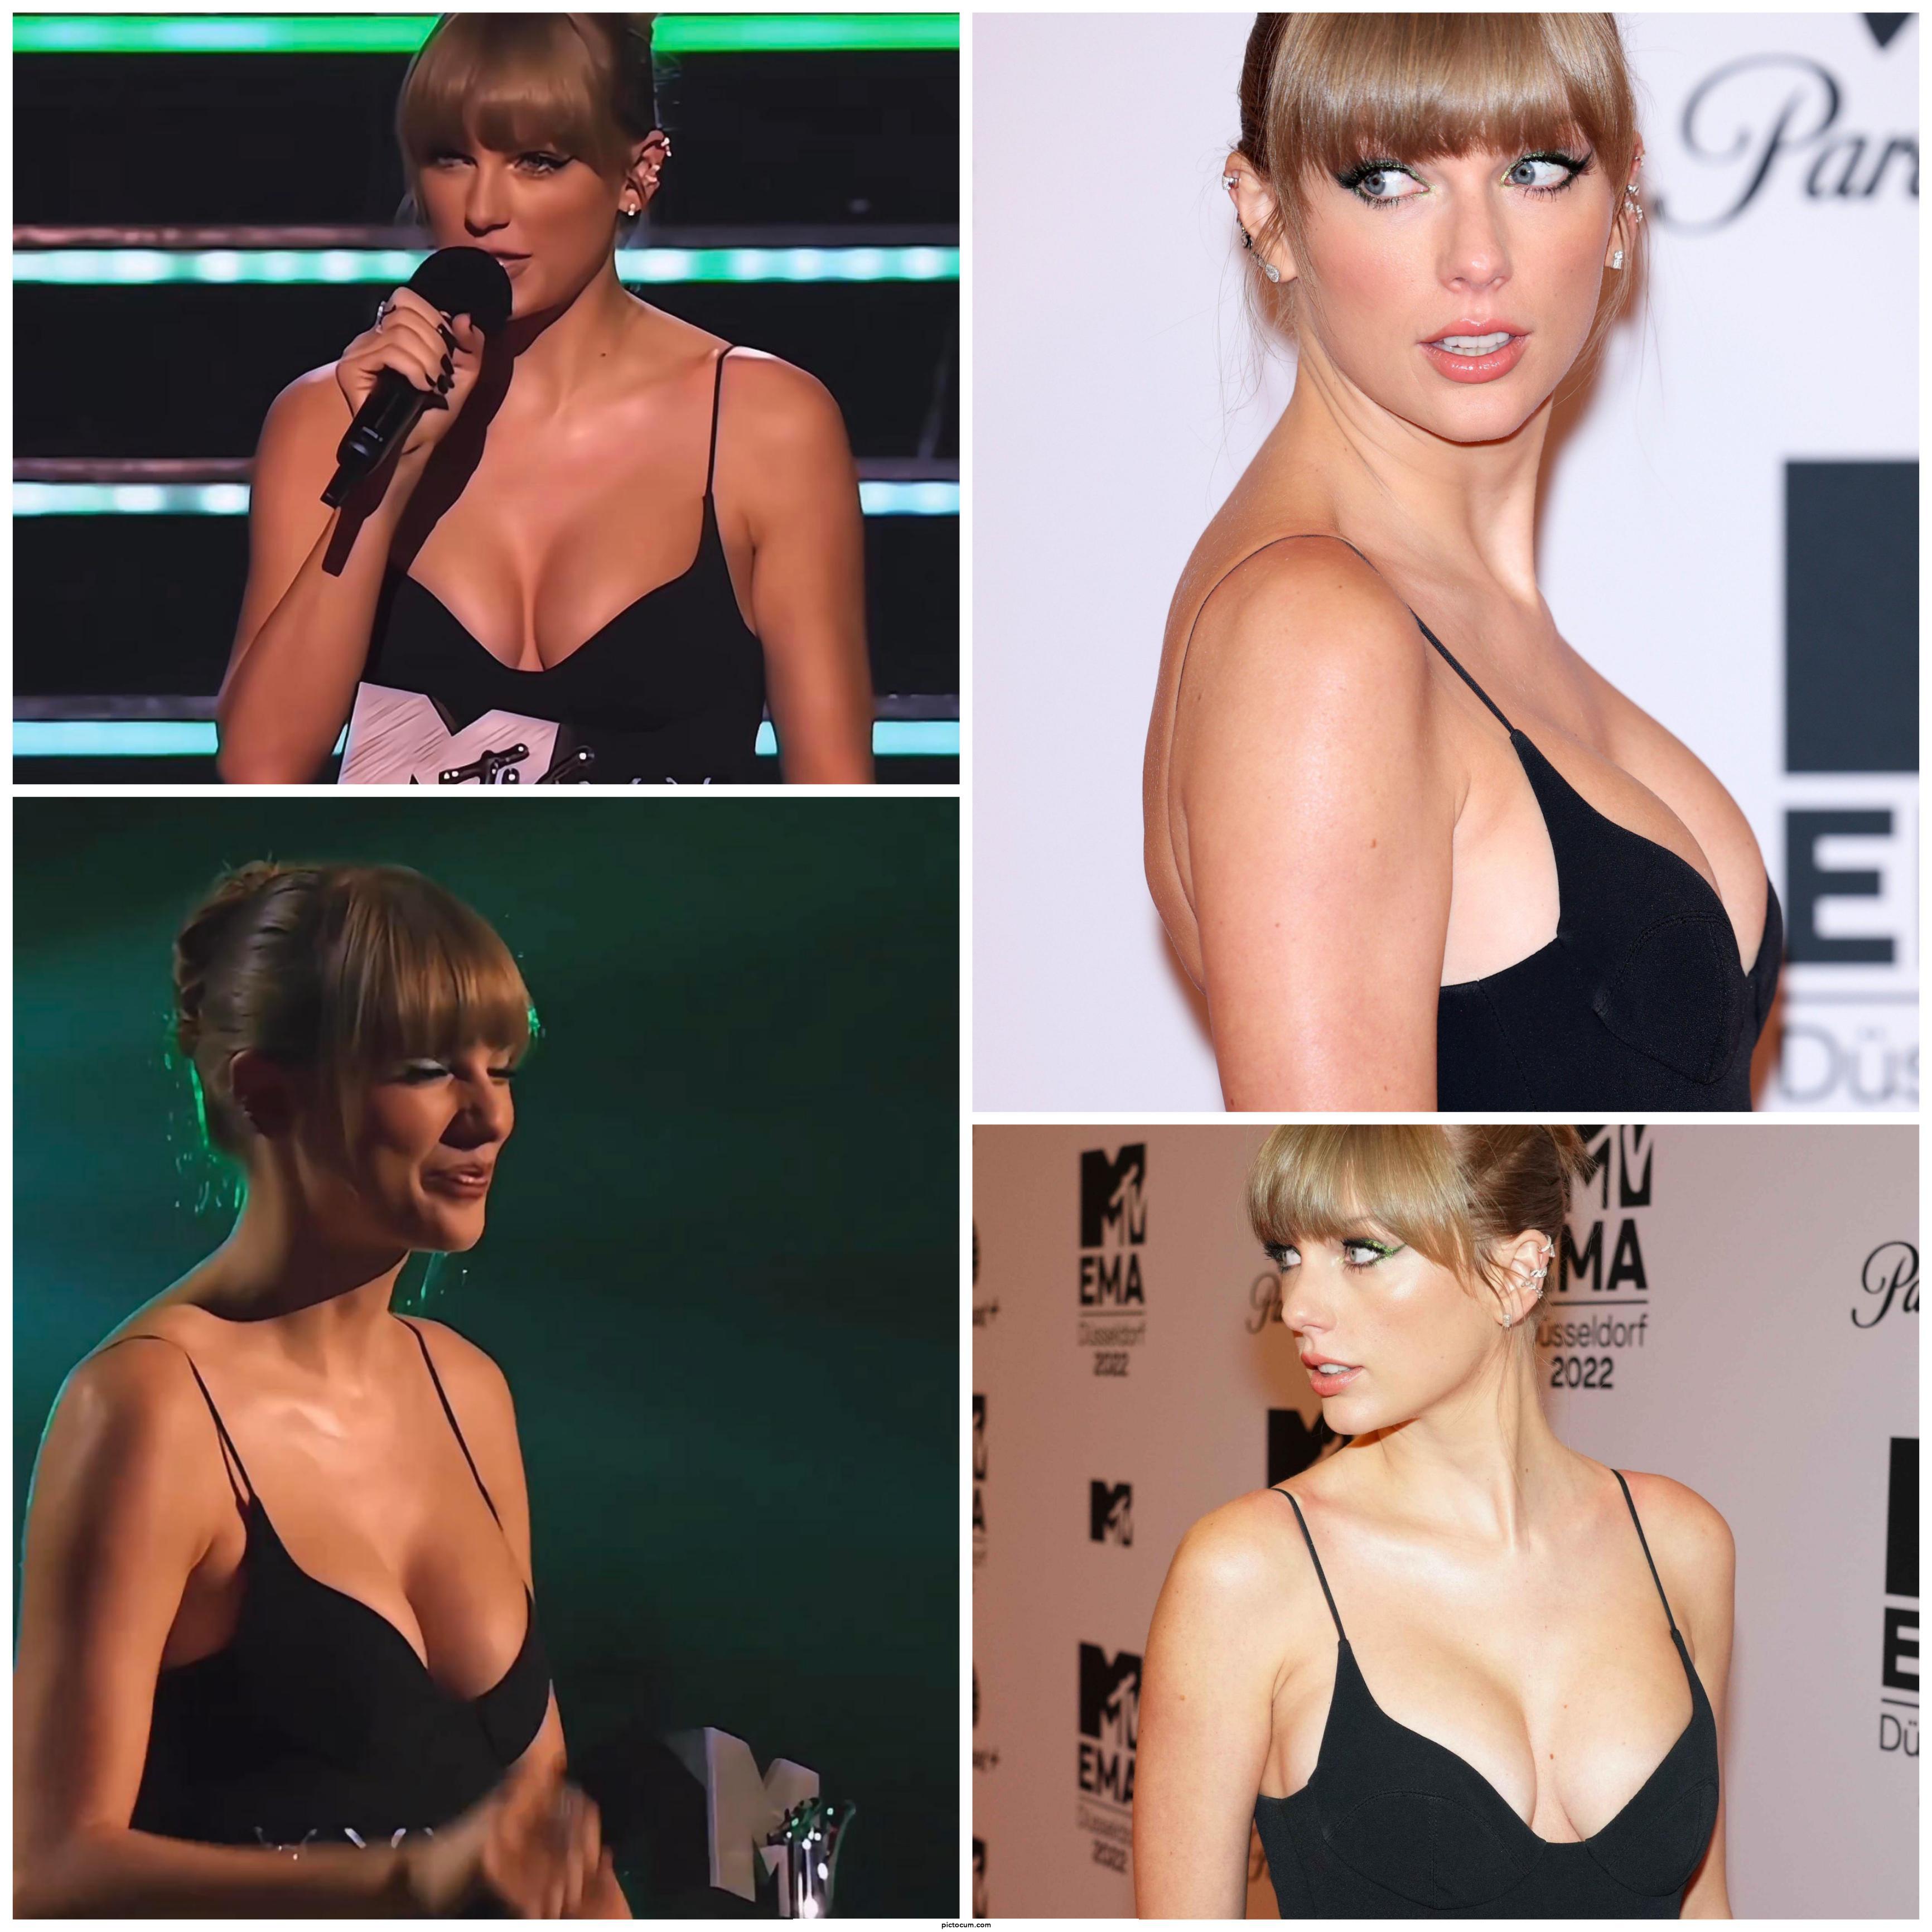 I think the internet will truly break if Taylor Swift ever goes topless